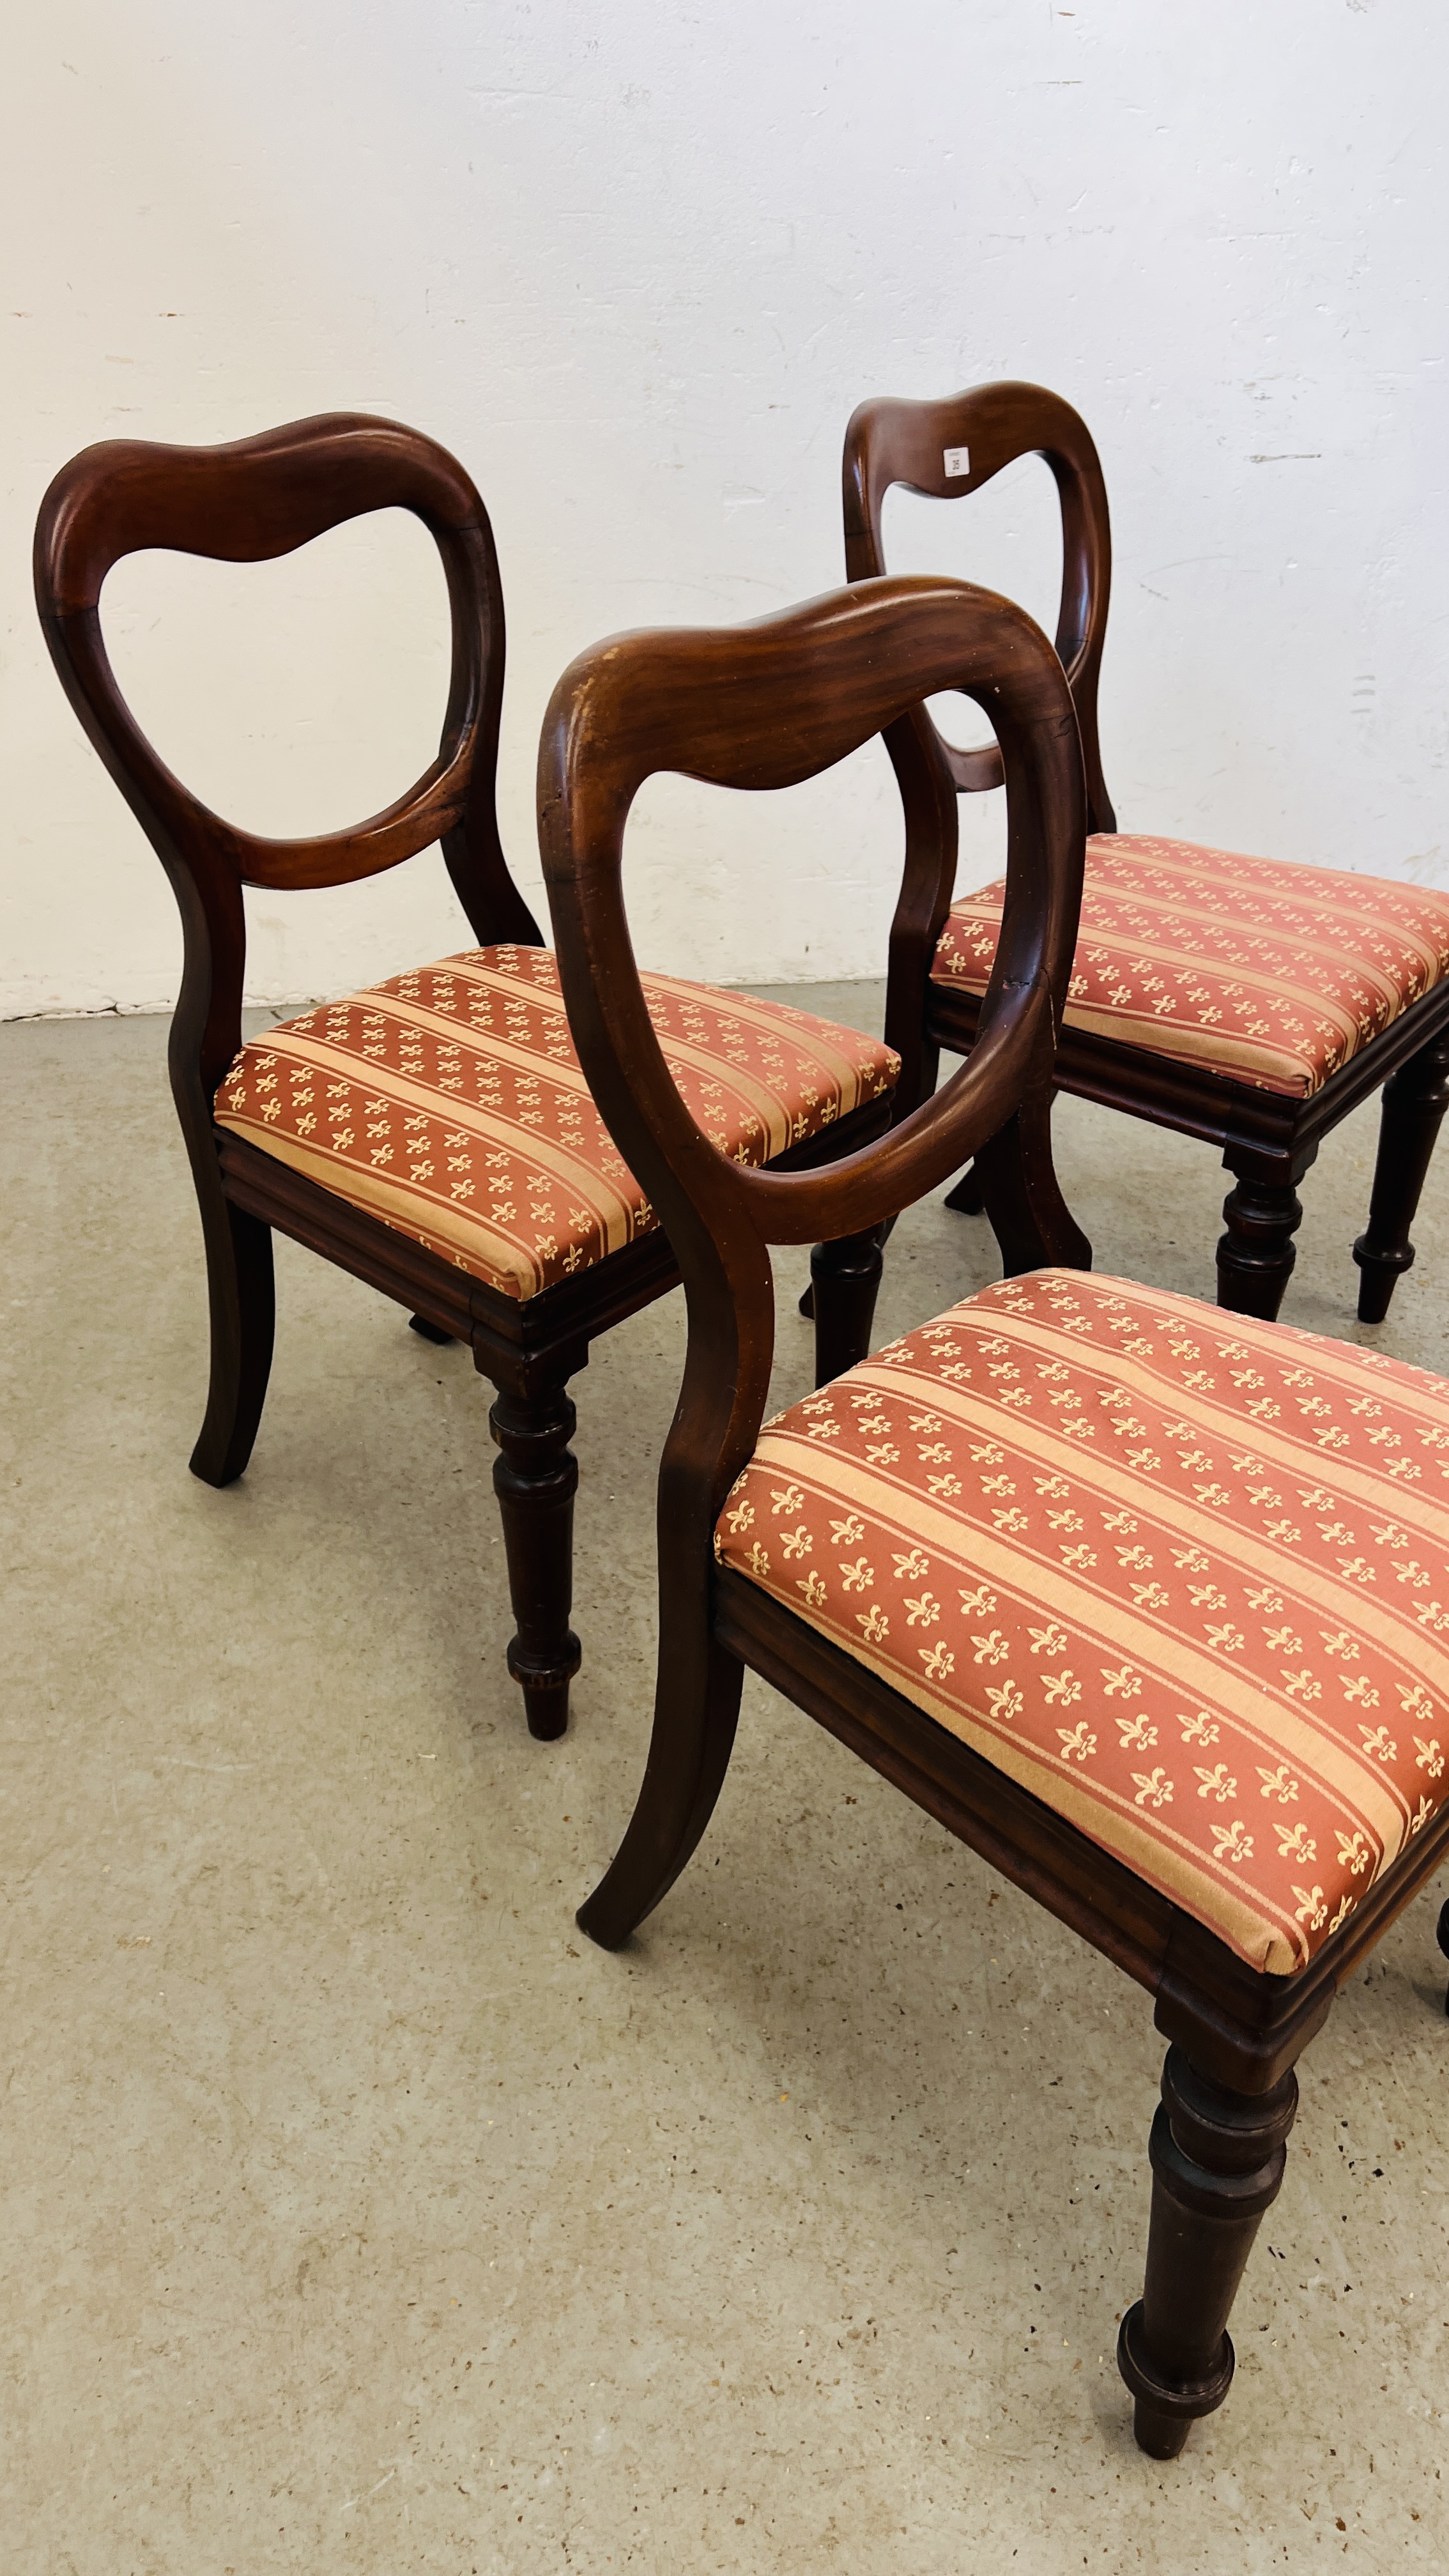 A SET OF FOUR VICTORIAN MAHOGANY SPOON BACK DINING CHAIRS. - Image 11 of 11